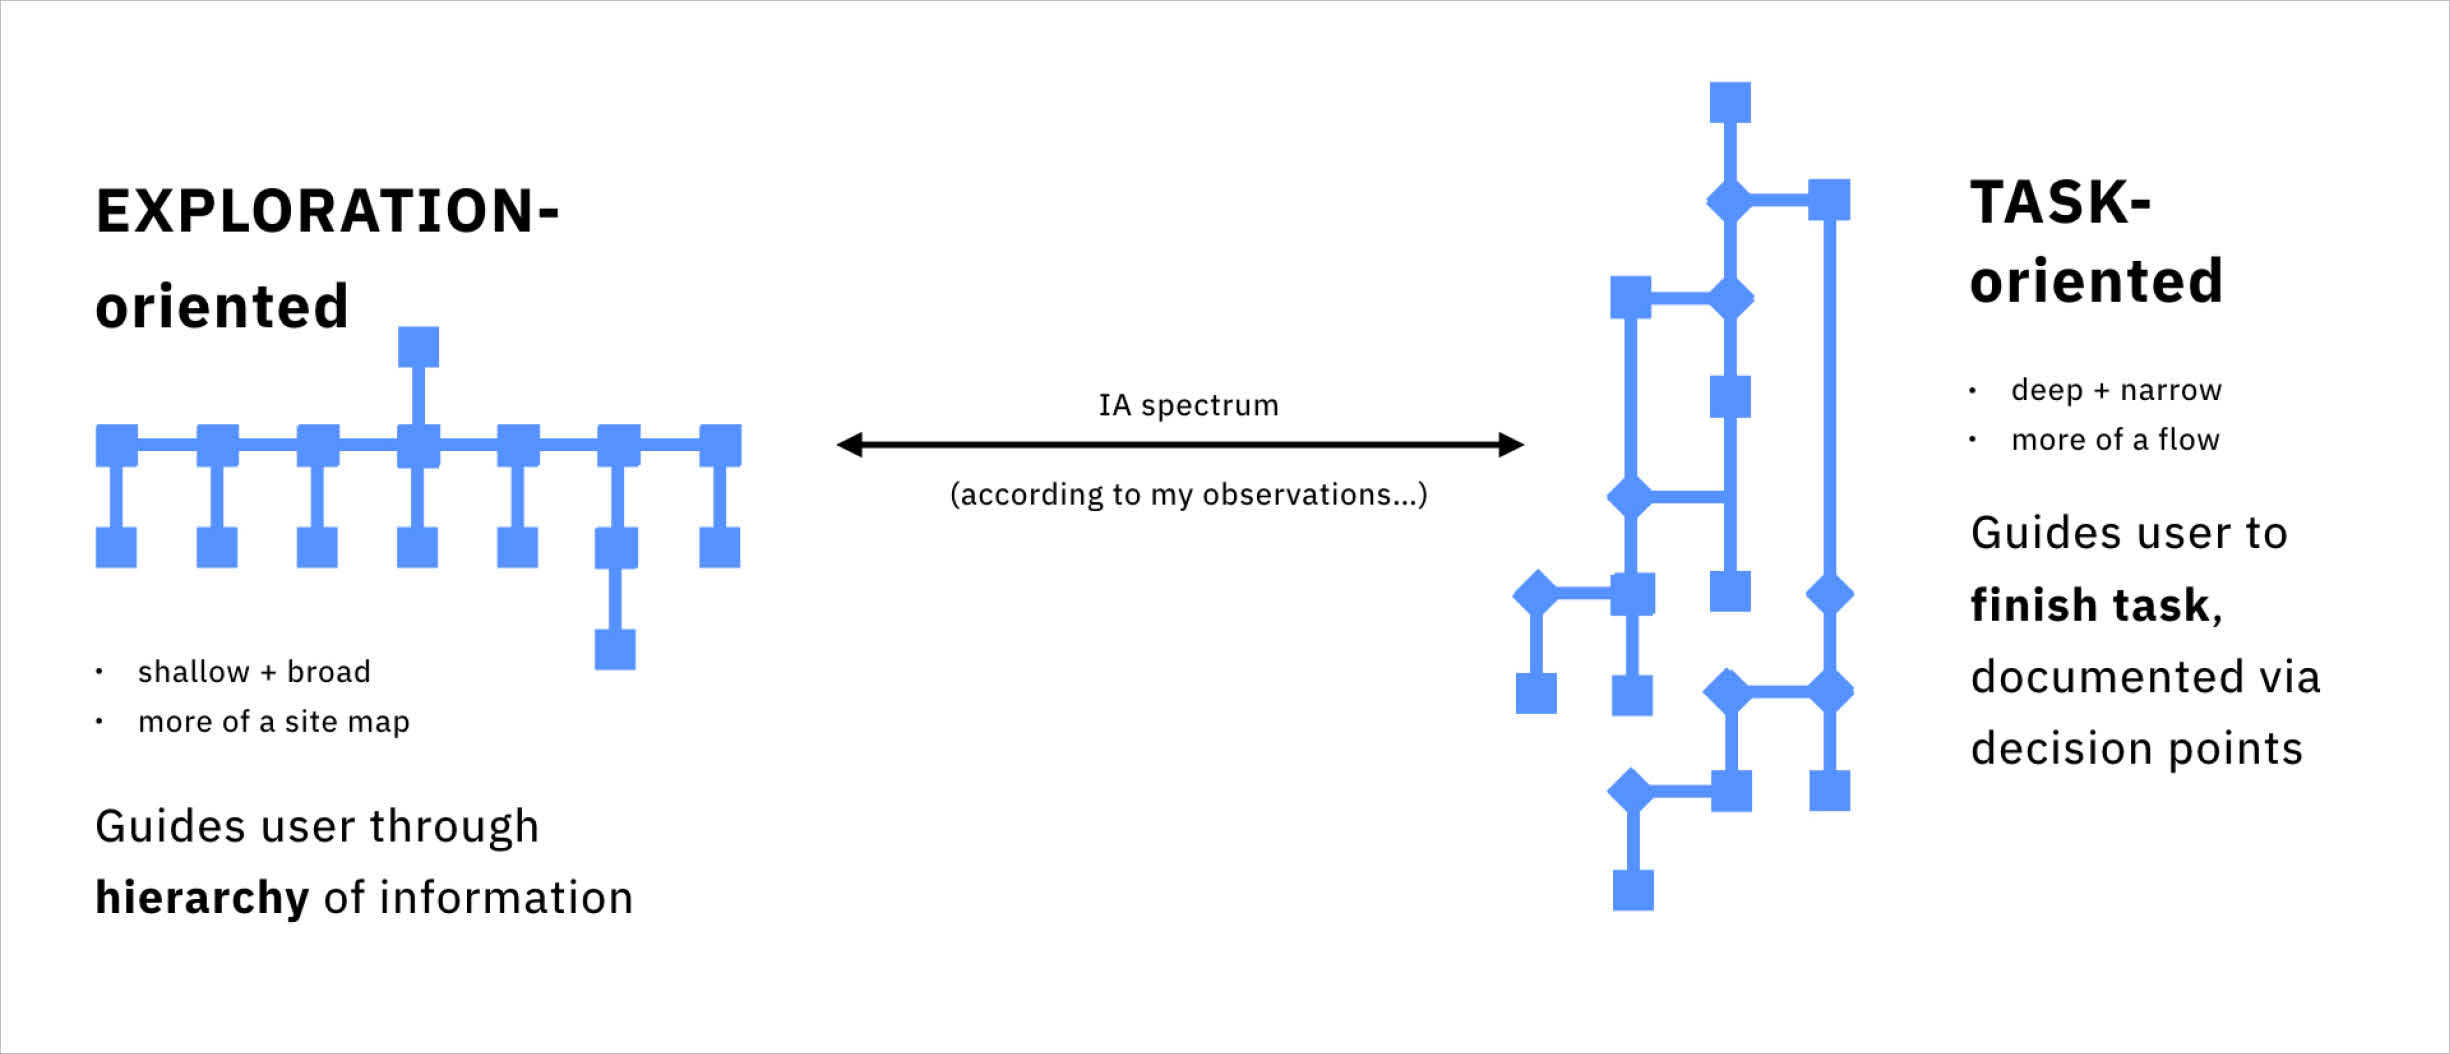 A spectrum showing the different types of IA maps, from exploration-oriented to task-oriented.